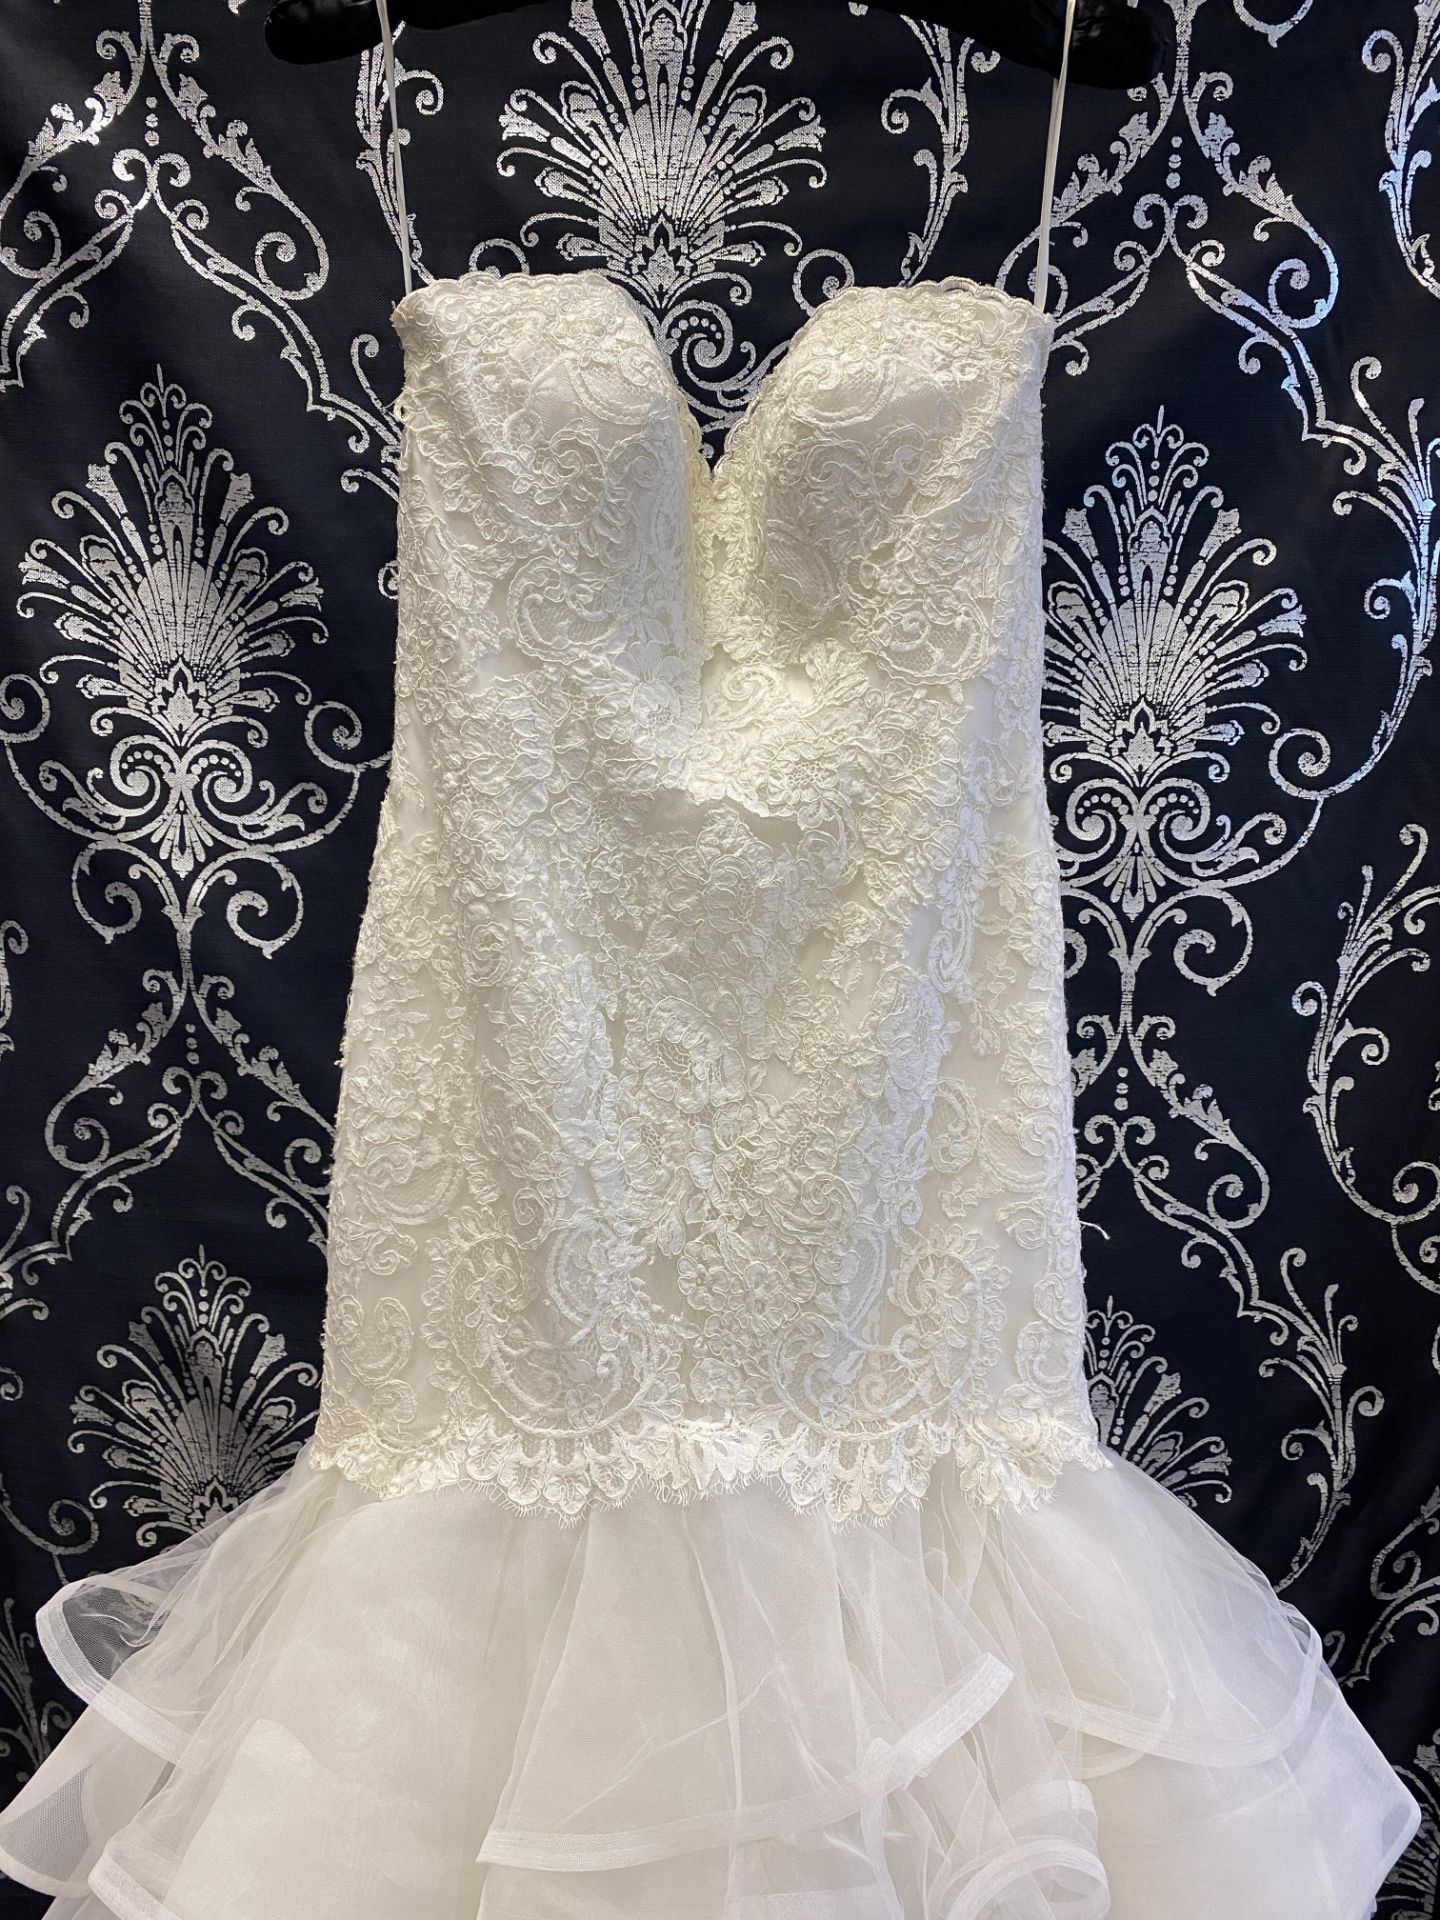 1 x MORI LEE '2879' Exceptional Strapless Lace Mermaid Style Designer Wedding Dress RRP £1,650 UK12 - Image 6 of 10